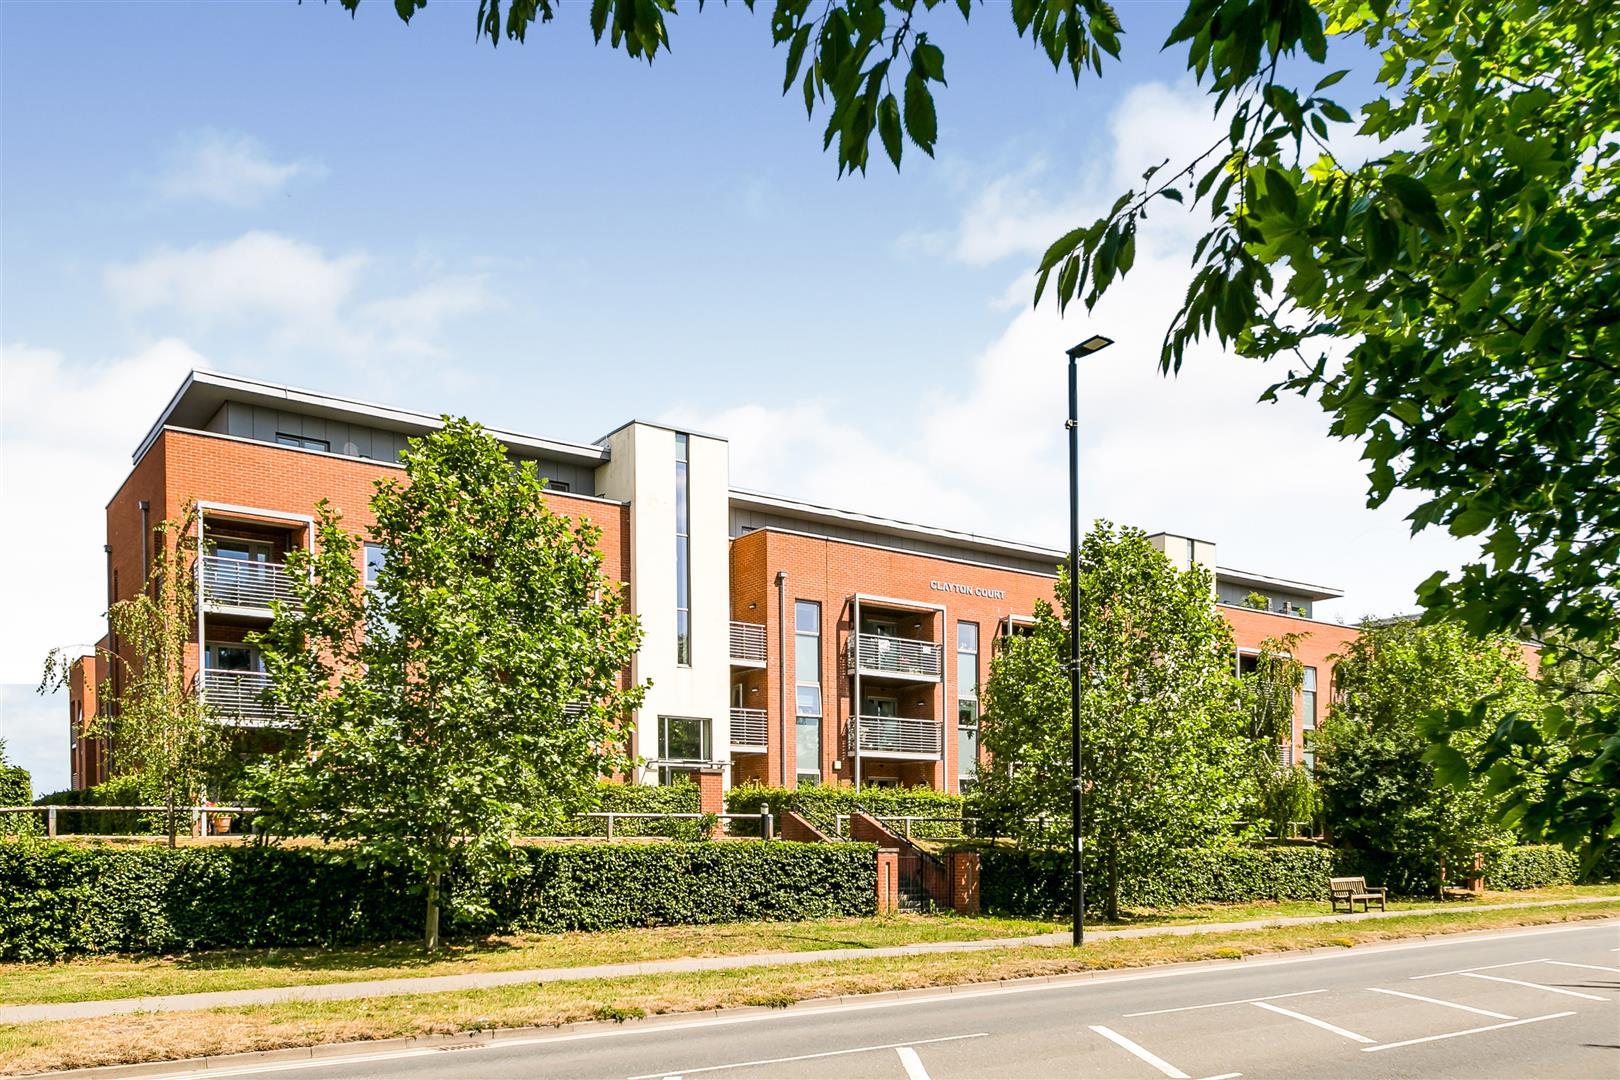 Clayton Court, The Brow, Burgess Hill